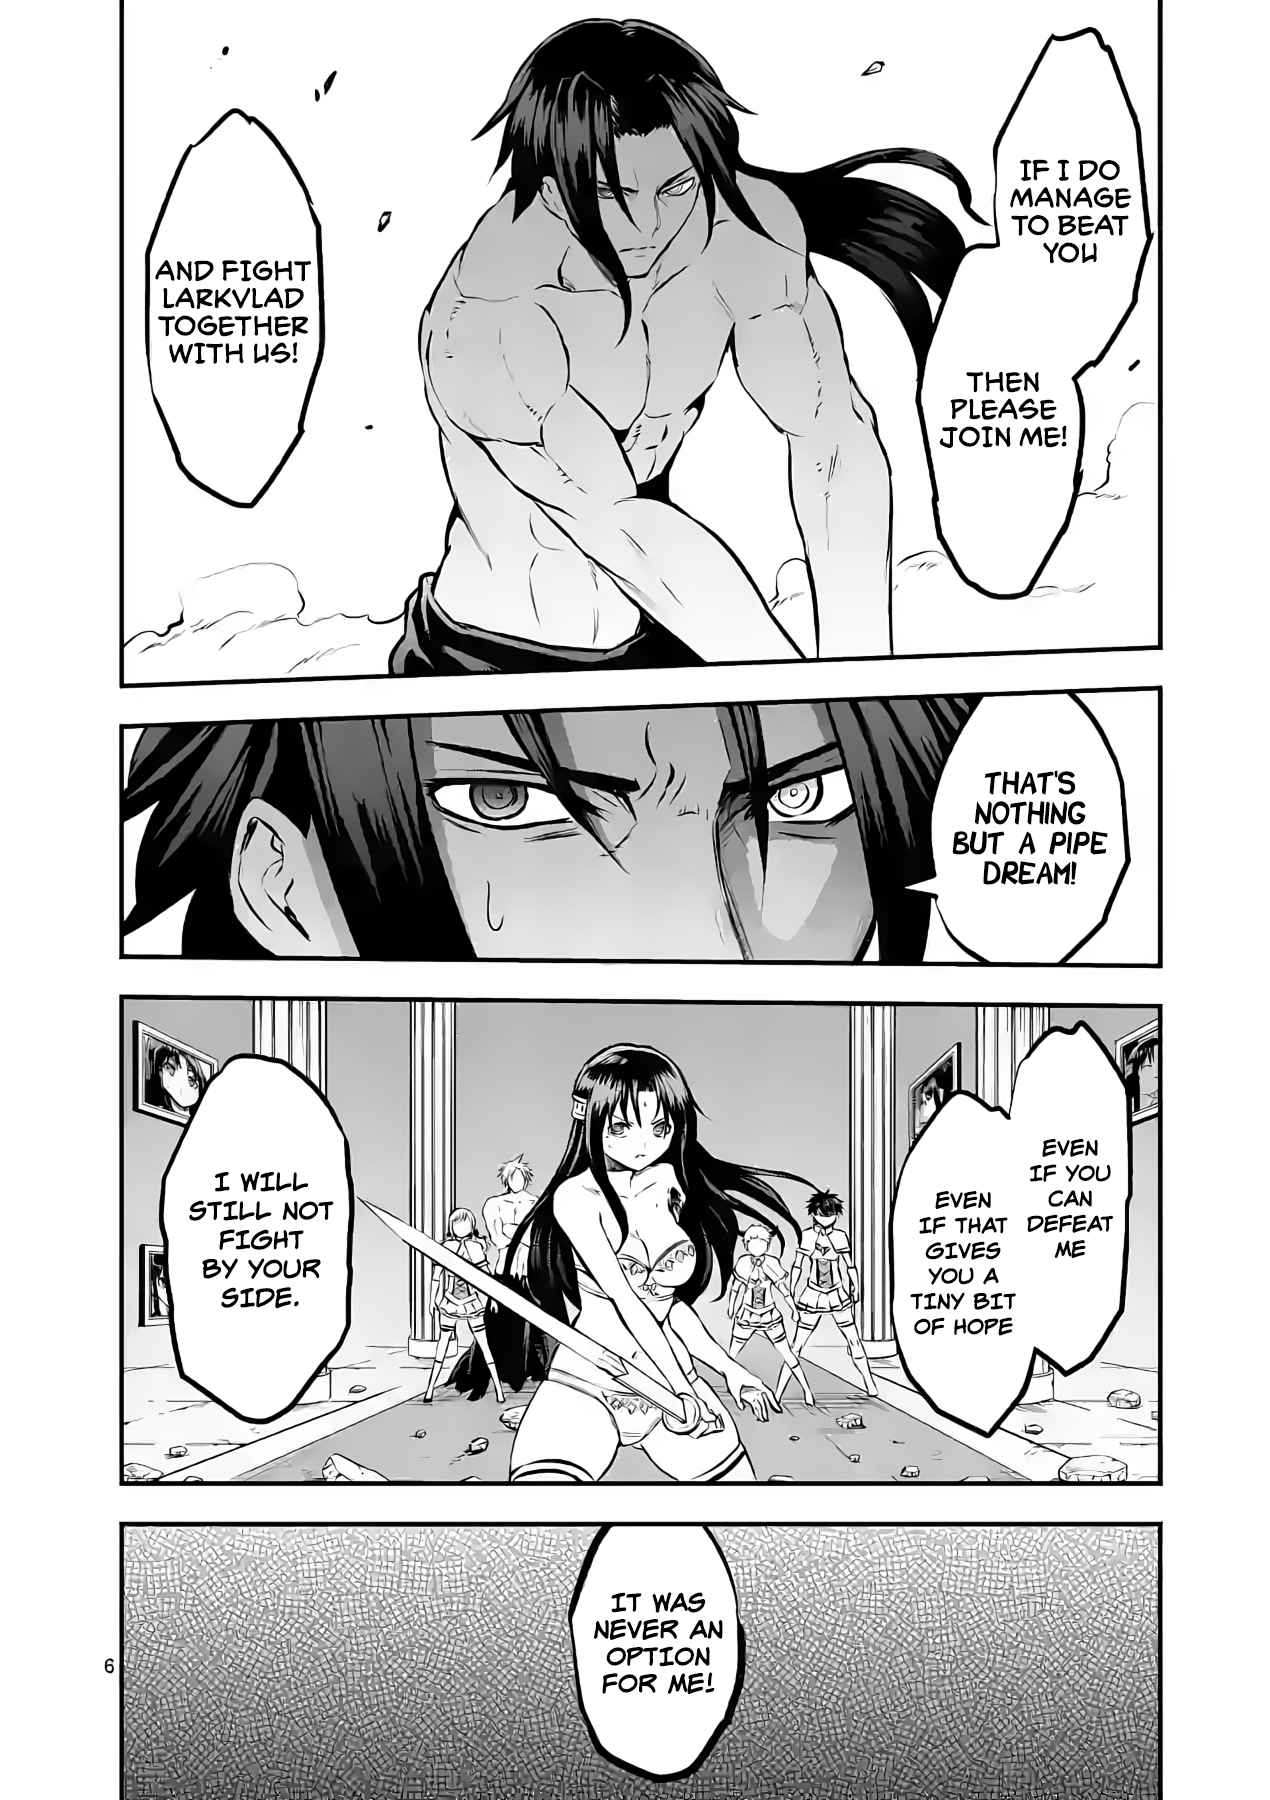 Yuusha ga Shinda! Ch. 183 Rights To Be By Your Side